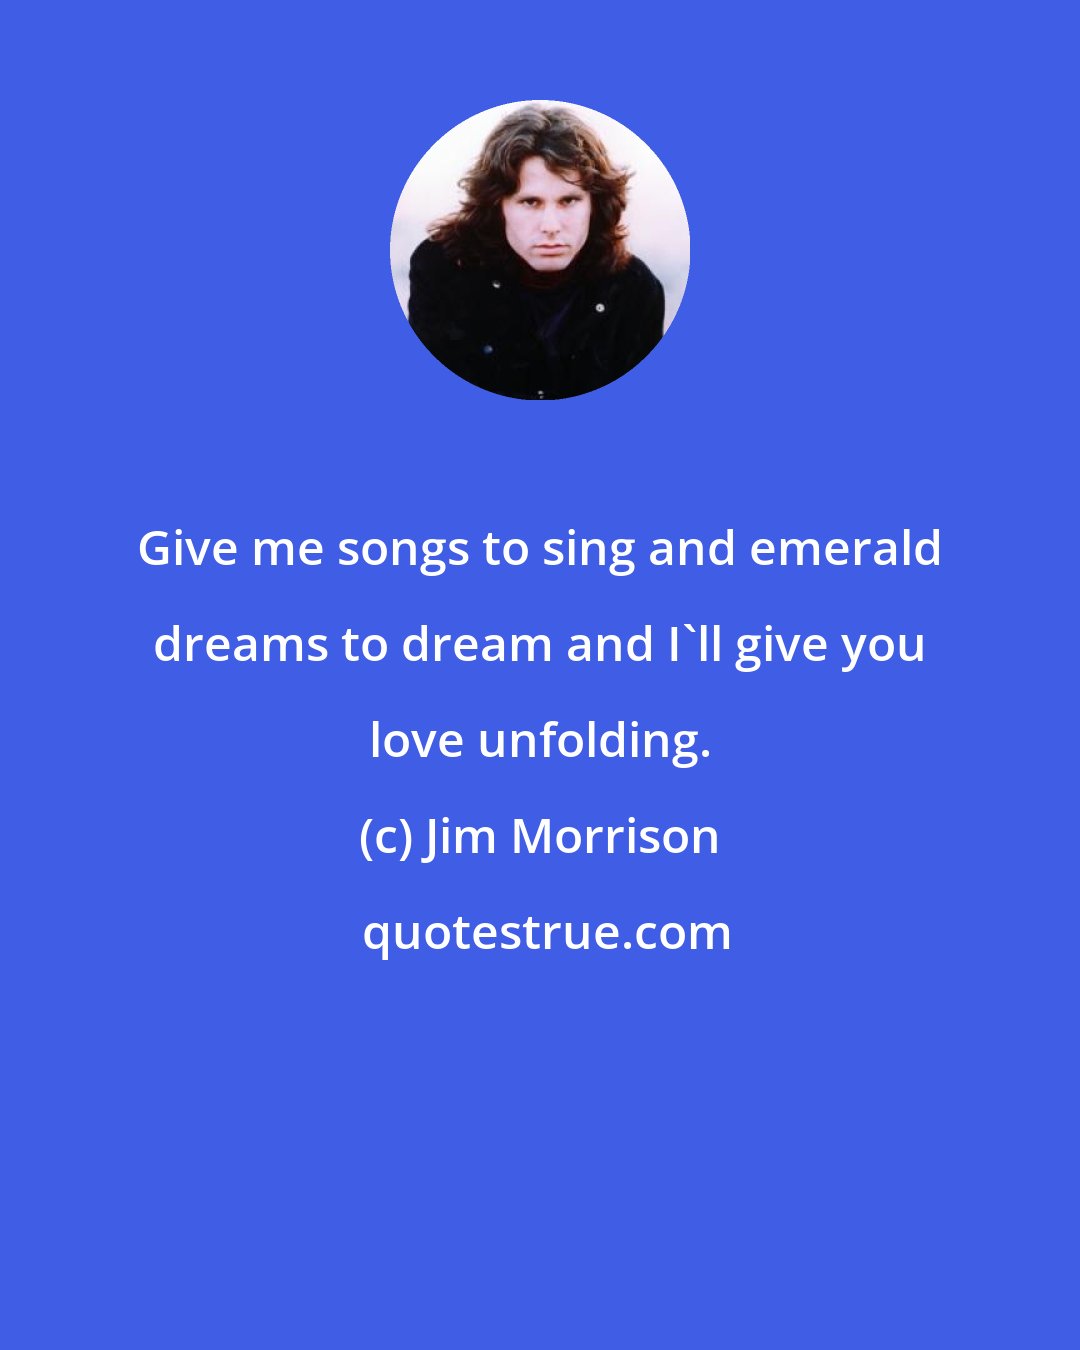 Jim Morrison: Give me songs to sing and emerald dreams to dream and I'll give you love unfolding.